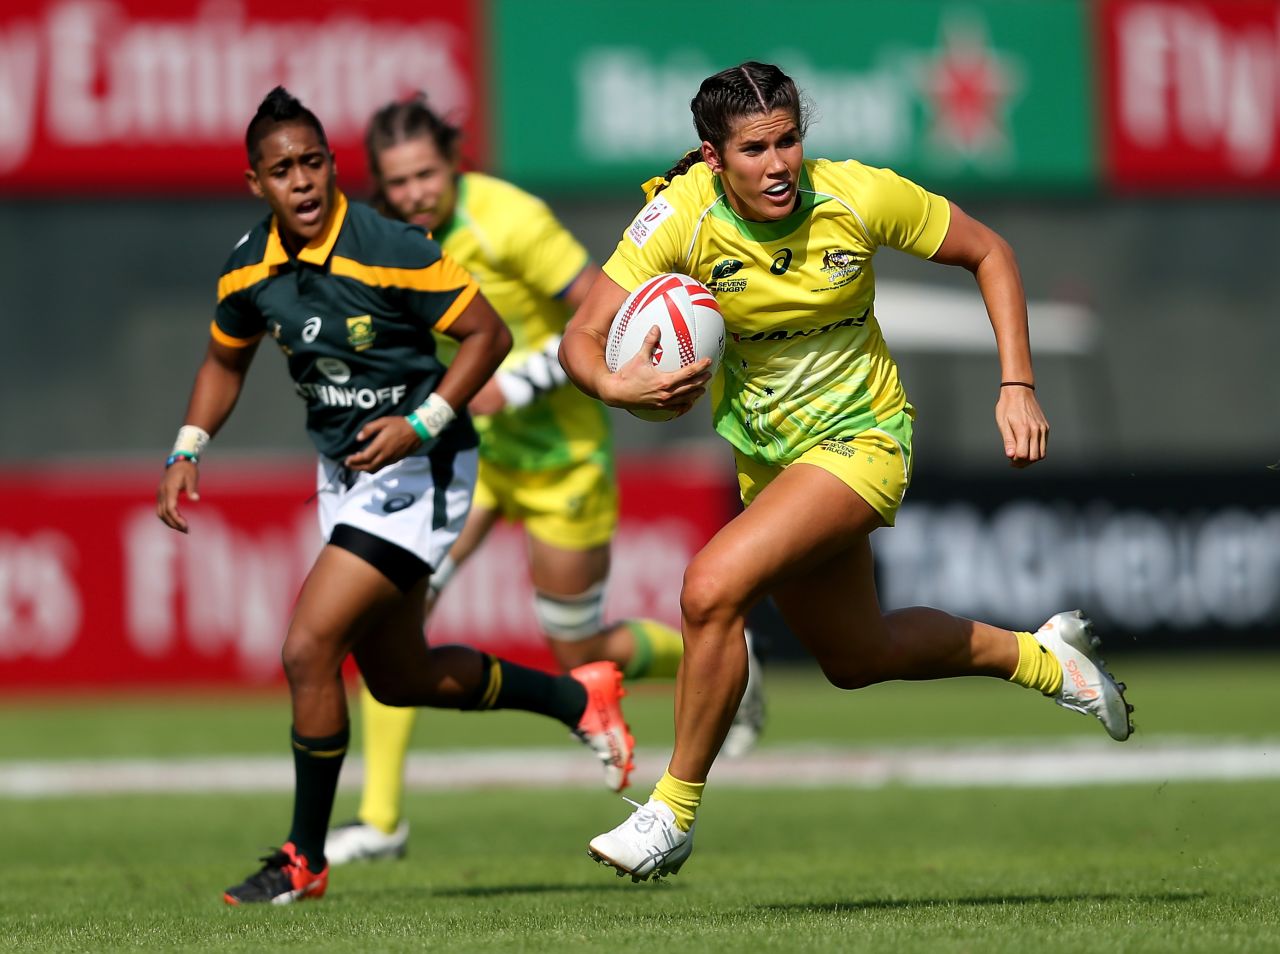 Having never even played the sport until her late teens, Caslick was named World Rugby Sevens women's Player of the Year in 2016. Still just 22, the all-rounder is already an Olympic gold medalist. "I grew up wanting to be the best in the world in whatever sport," <a href="http://edition.cnn.com/2016/12/01/sport/charlotte-caslick-world-series-rugby-sevens/index.html">Caslick told CNN Sport</a>. "It's so special for all of this to come so early in my career," she said.